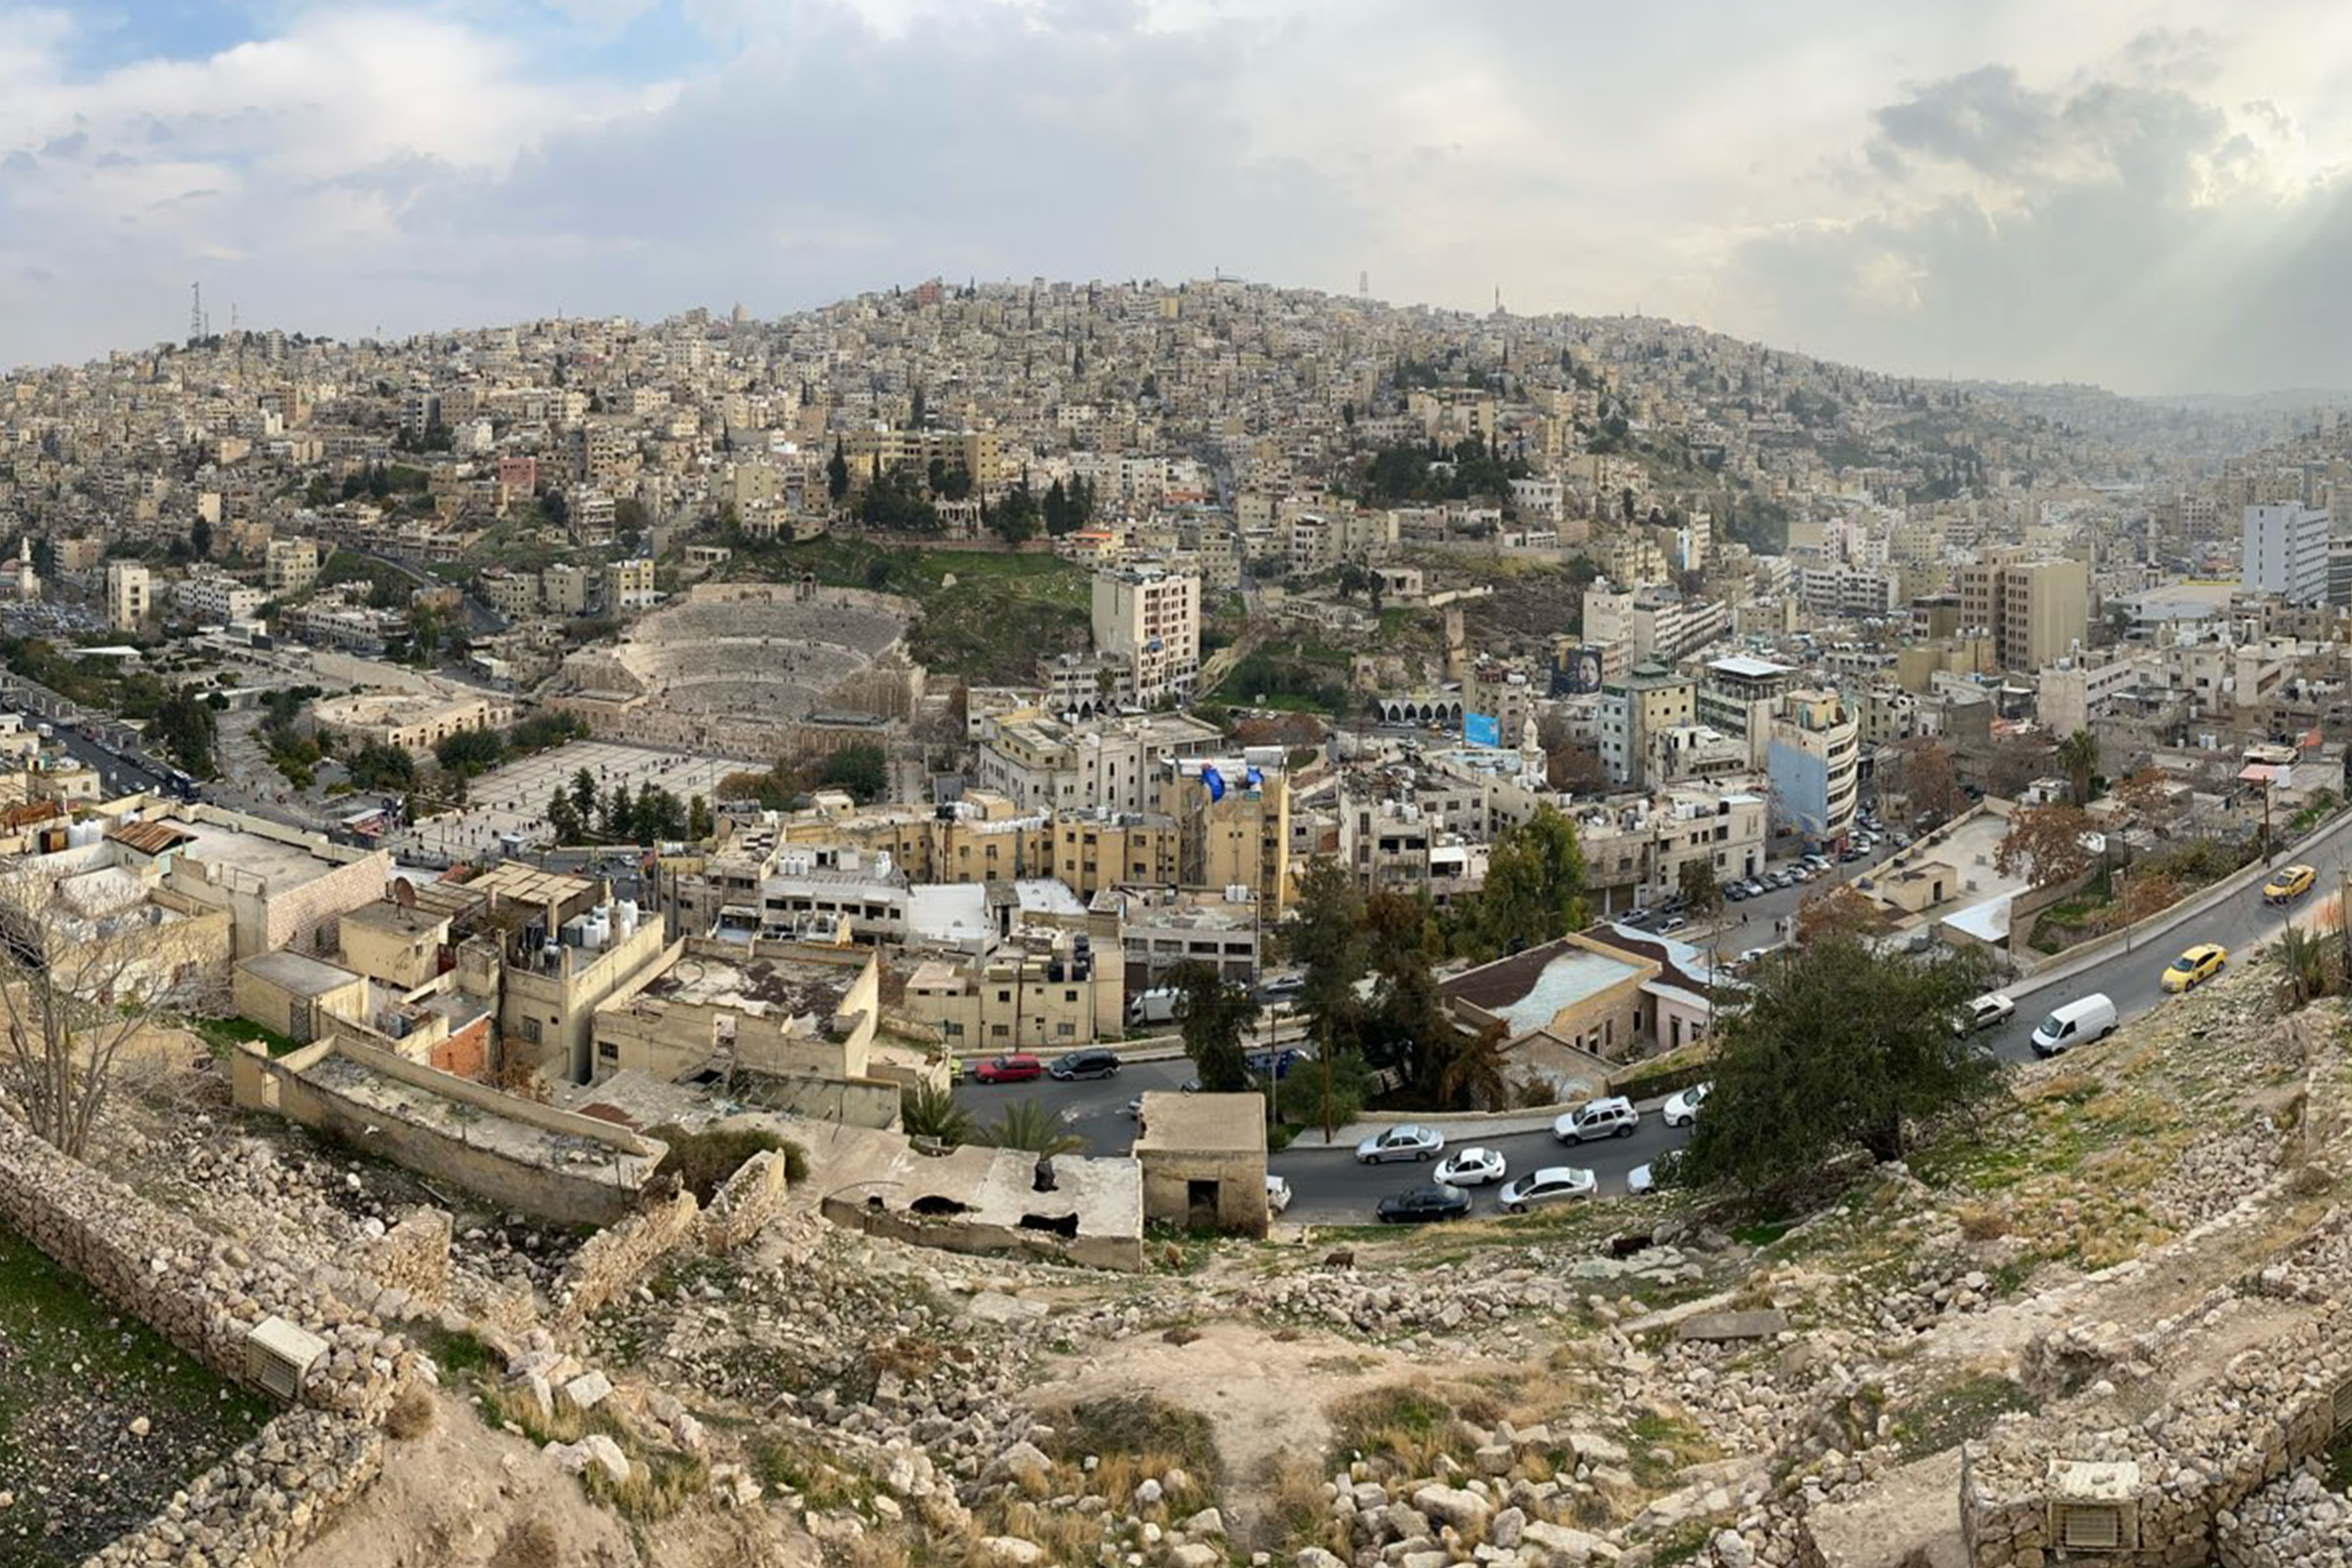 A view of Jordan’s capital, Amman, from atop one of the city’s seven hills.